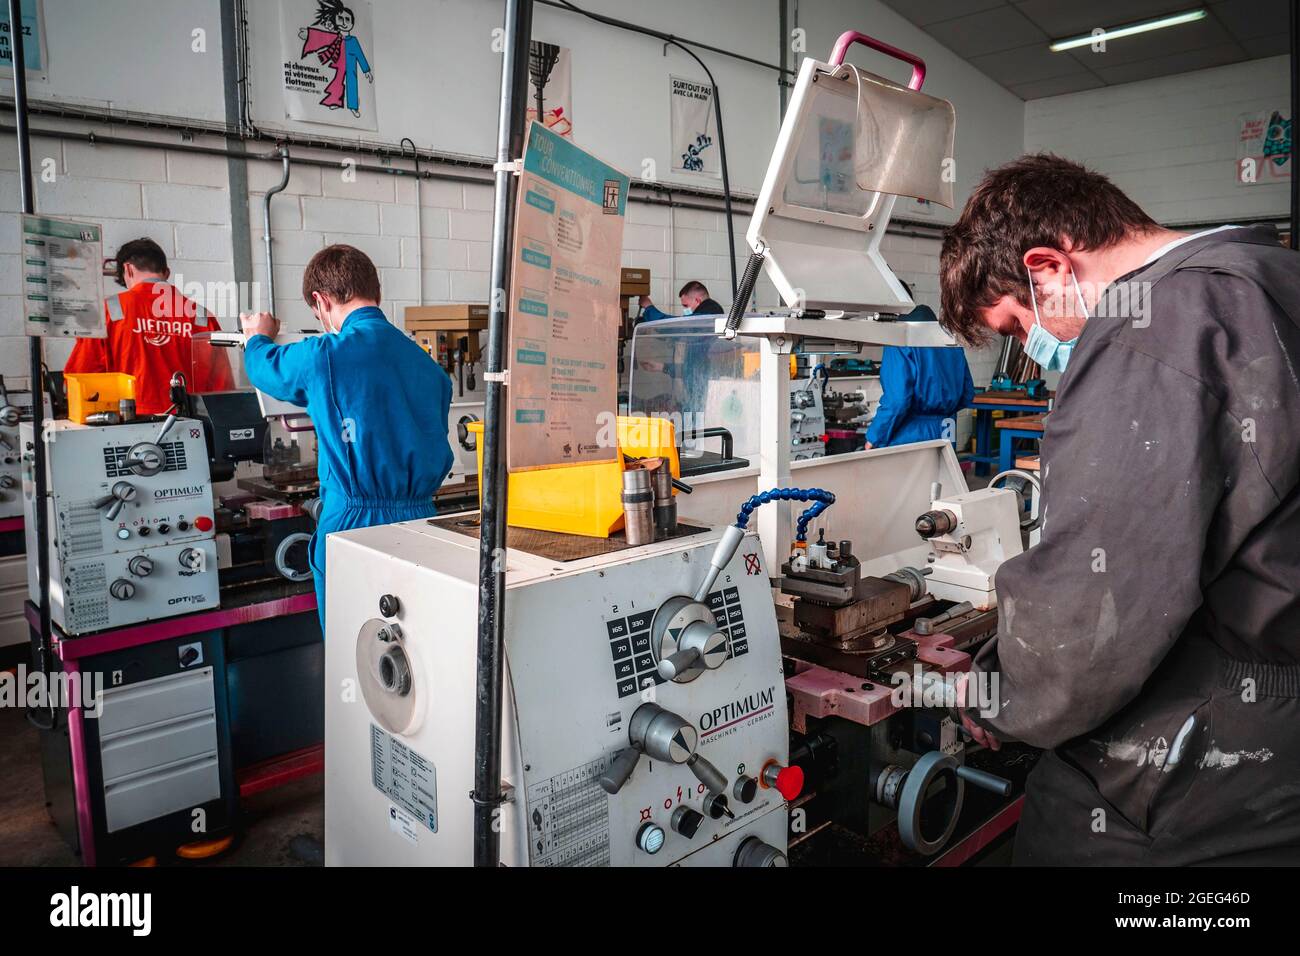 Technical college “Lycee Pierre Loti” in Paimpol (Brittany, north western France): students in the machining workshop. Maritime college preparing stud Stock Photo